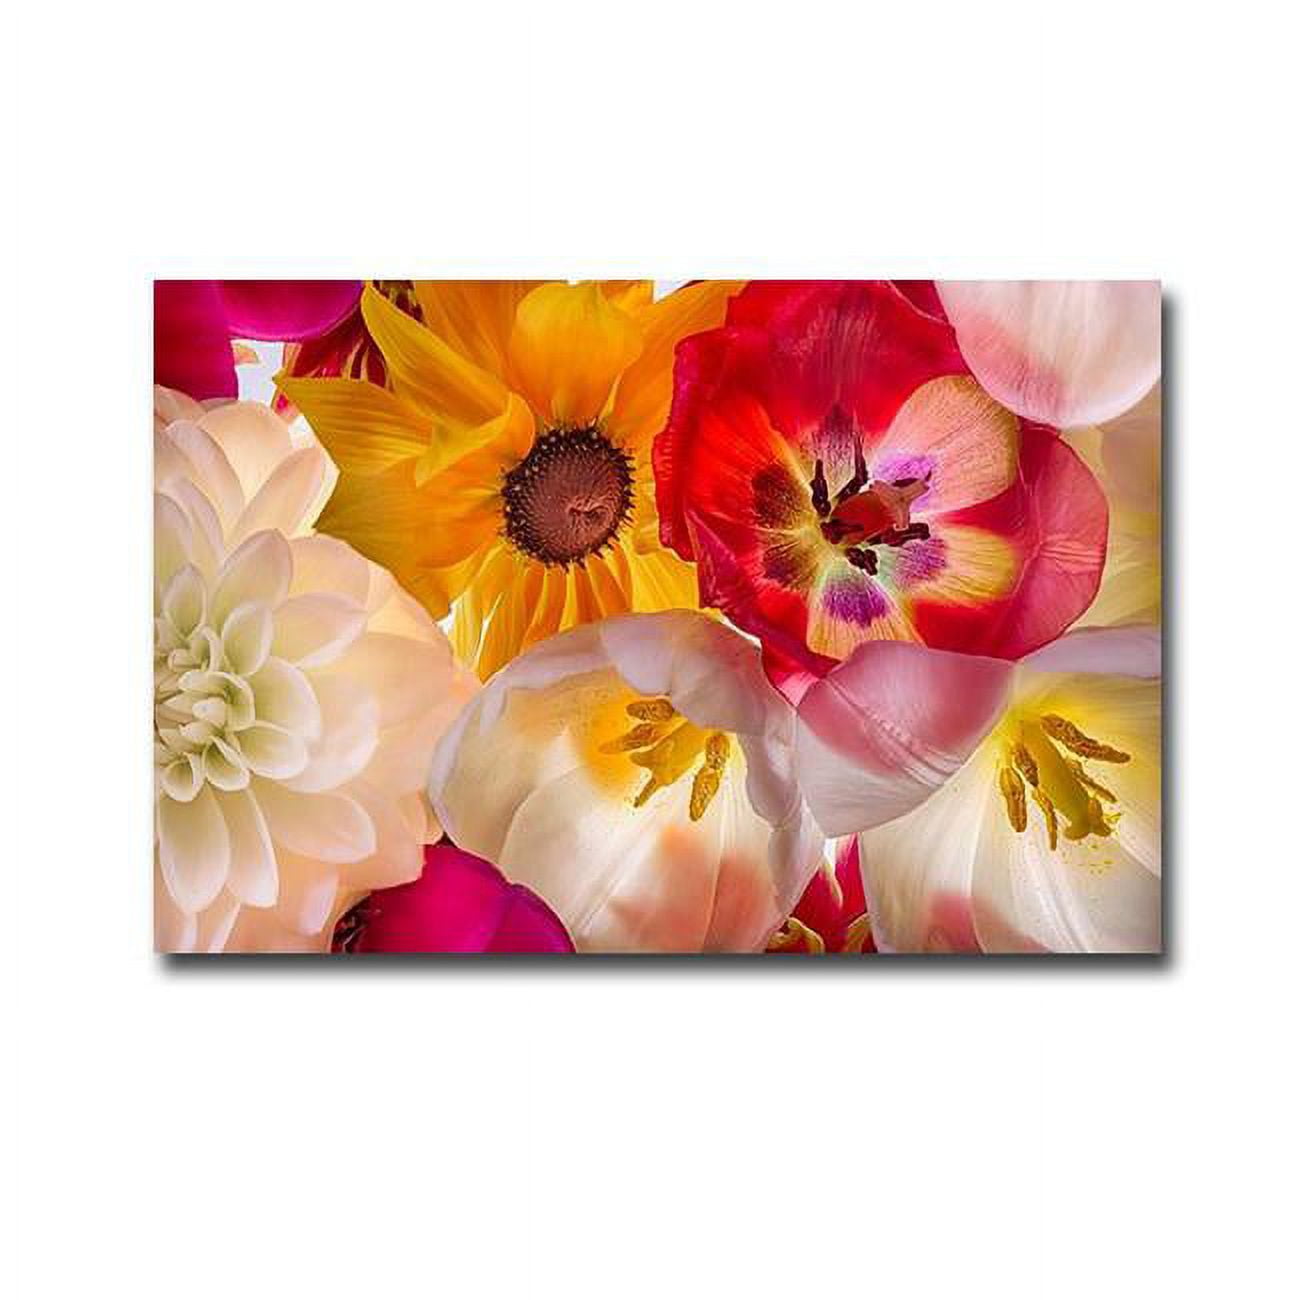 1624a729eg When Flowers Talk By Harold Davis Premium Gallery-wrapped Canvas Giclee Art - 16 X 24 X 1.5 In.